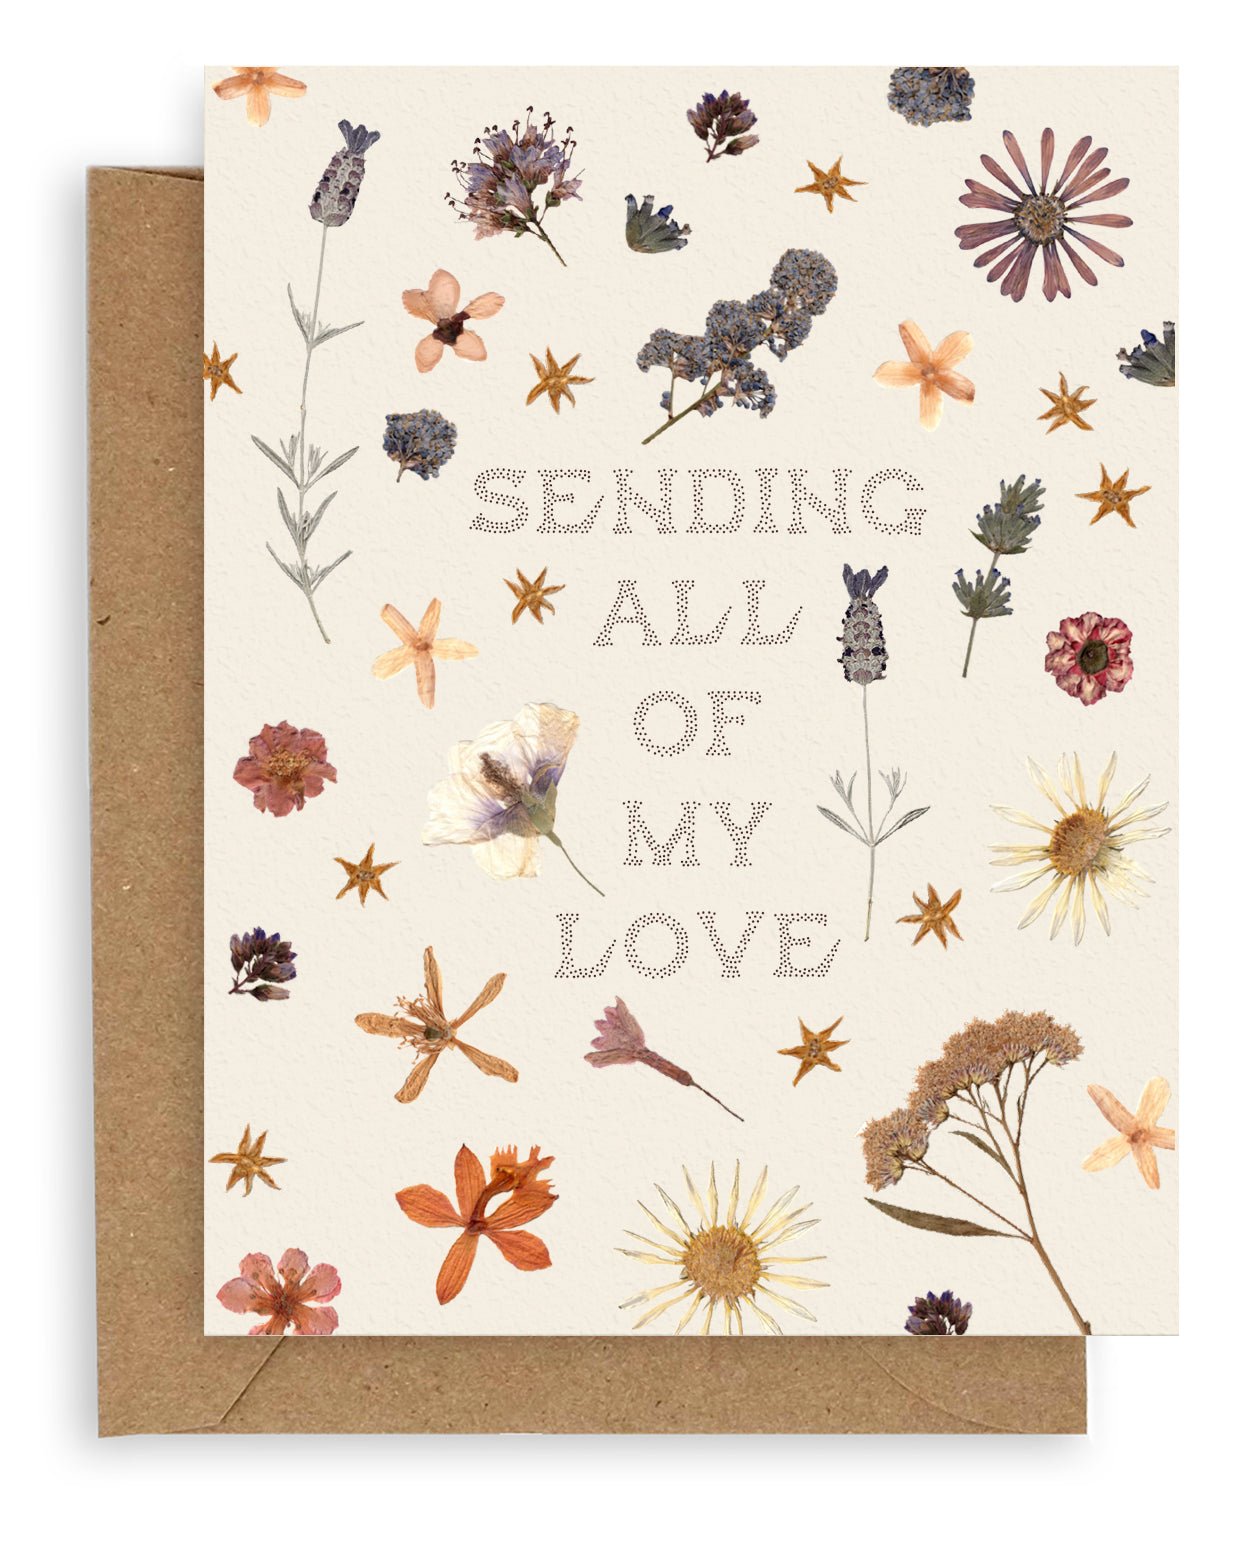 "Sending All Of My Love" pointillism text font design aligned in the center of the cream colored card surrounded by pressed flowers printed on cardstock with a kraft envelope.